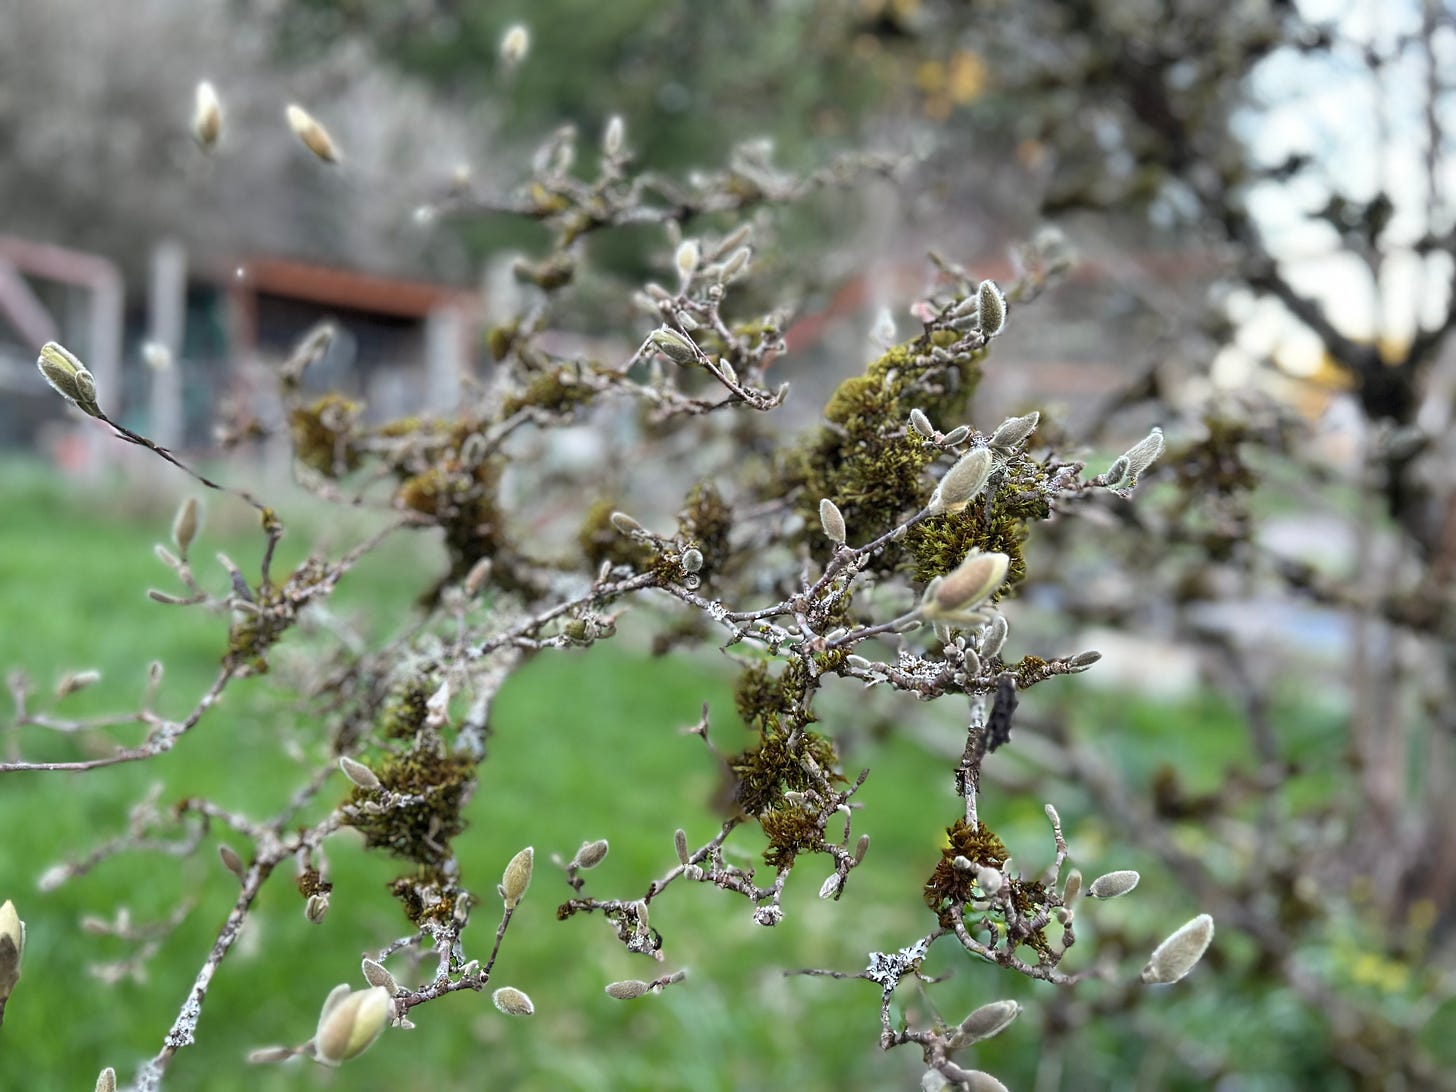 In the foreground, star magnolia buds on moss-covered twigs; in the background, a three-sided shed.